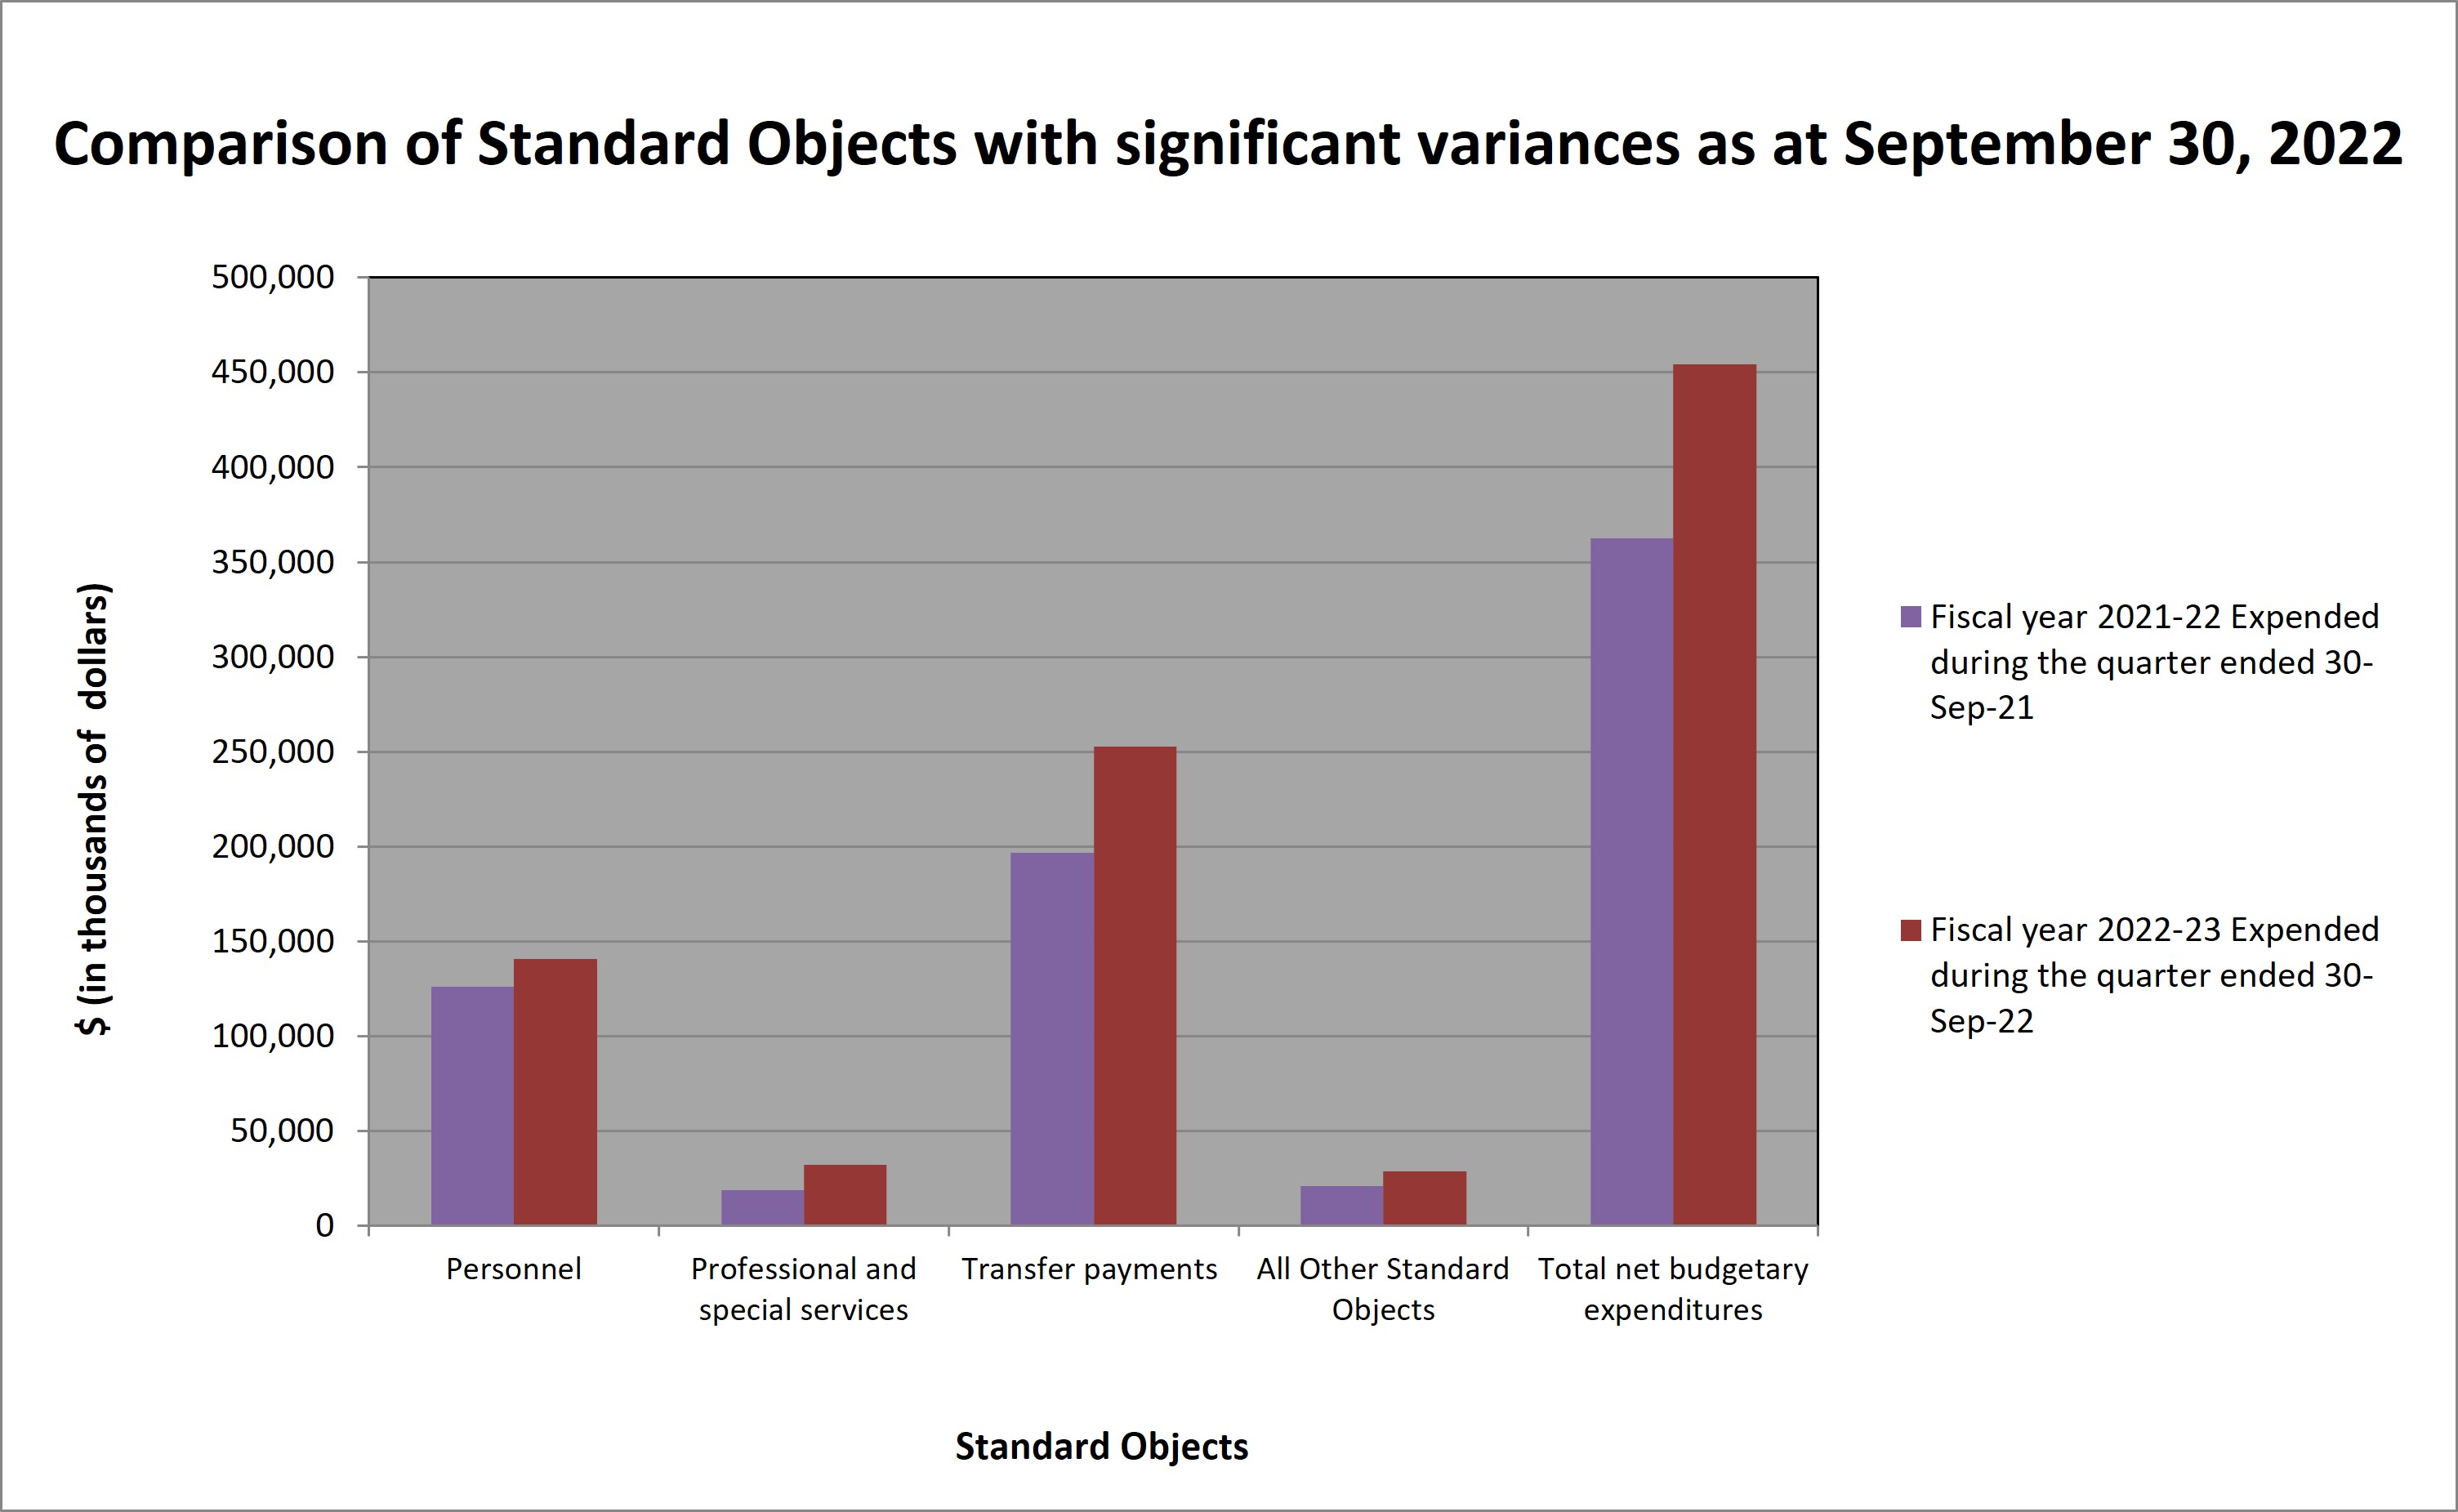 Comparison of Standard Objects with significant variances as at September 30, 2022